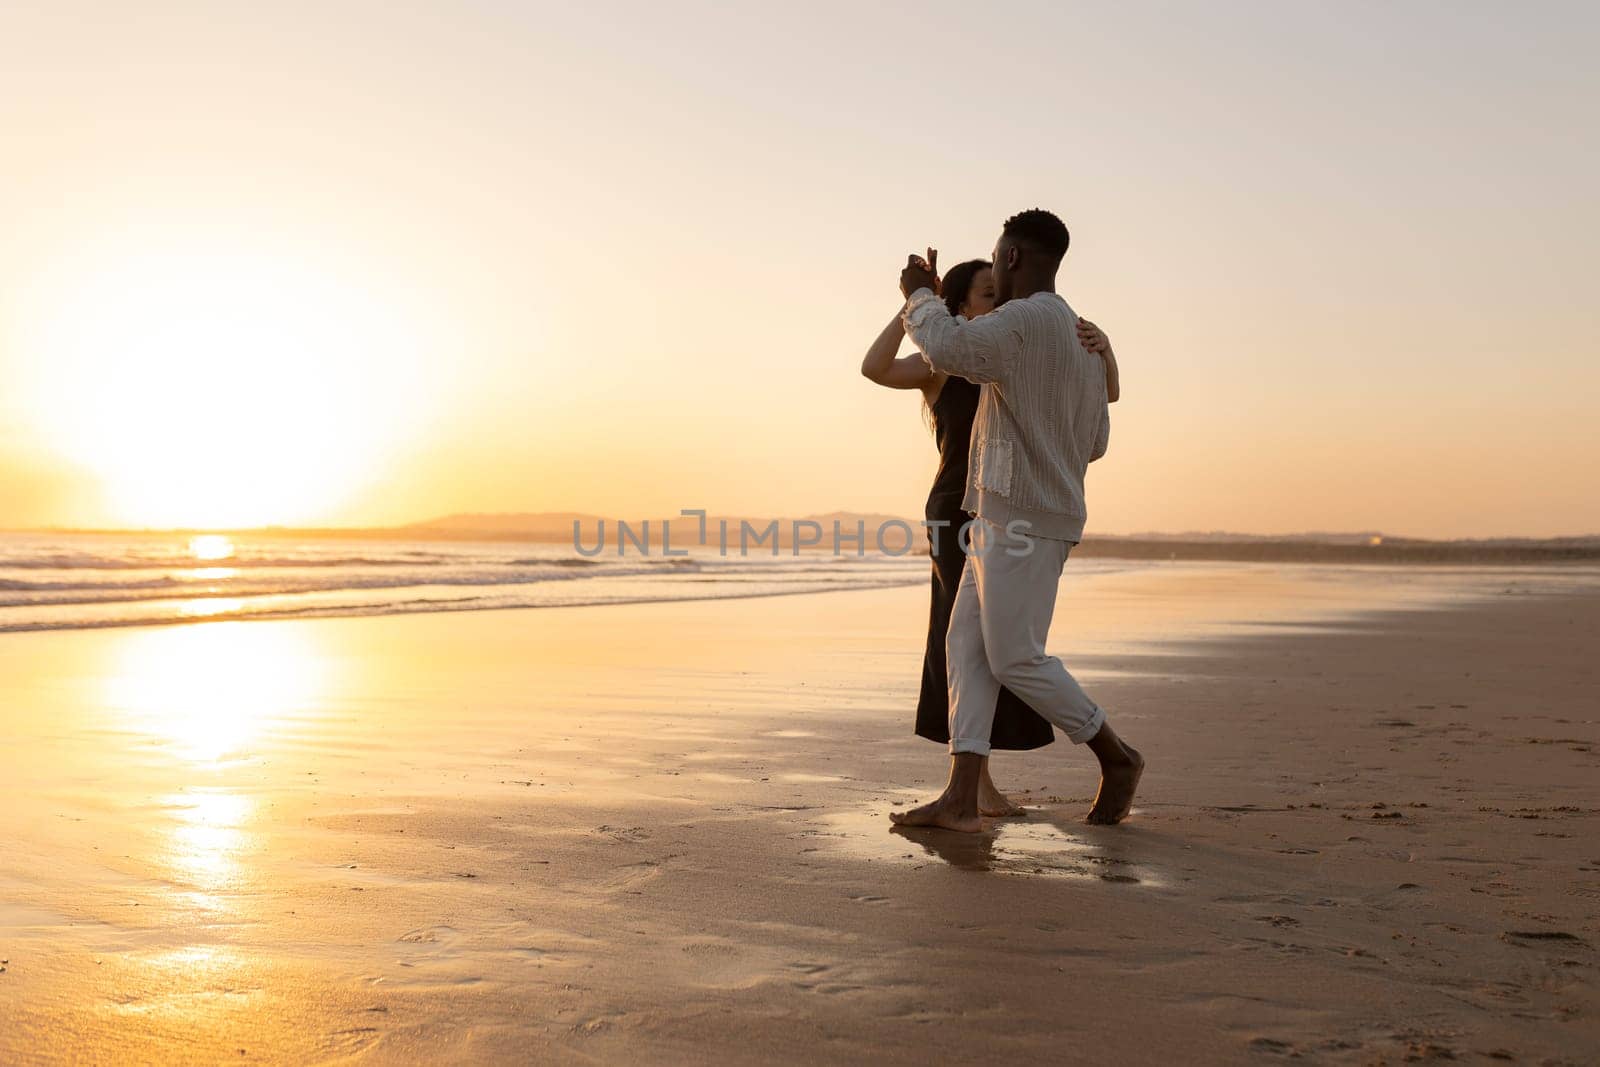 A couple is dancing on the beach at sunset. The man is holding the woman's hand and they are both smiling. Scene is romantic and happy